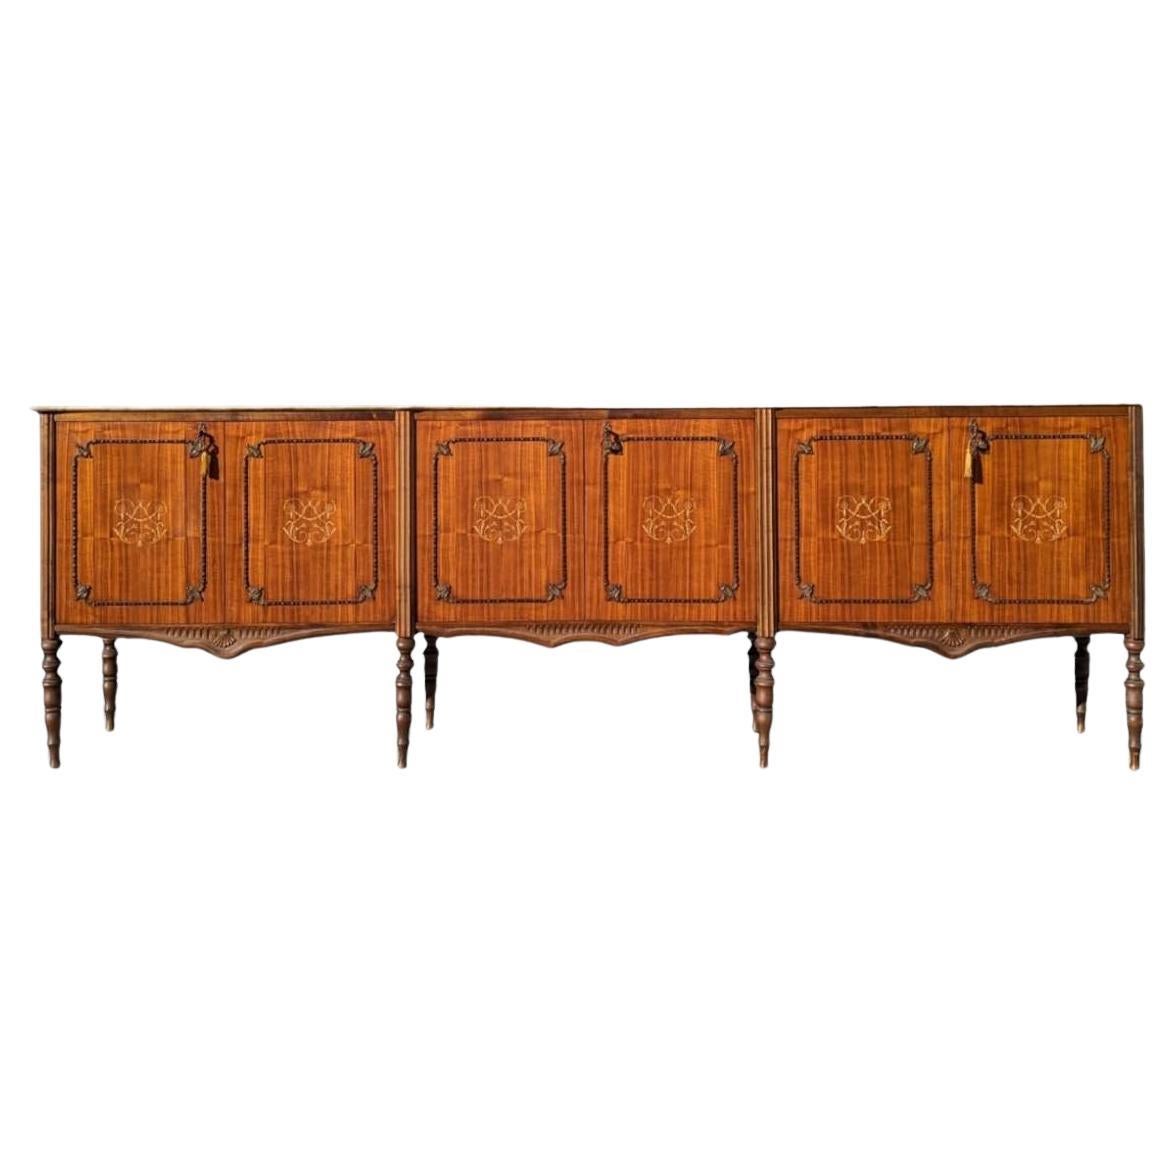 Antique French Louis XVI Marble Top Sideboard with Inlaid Floral Details